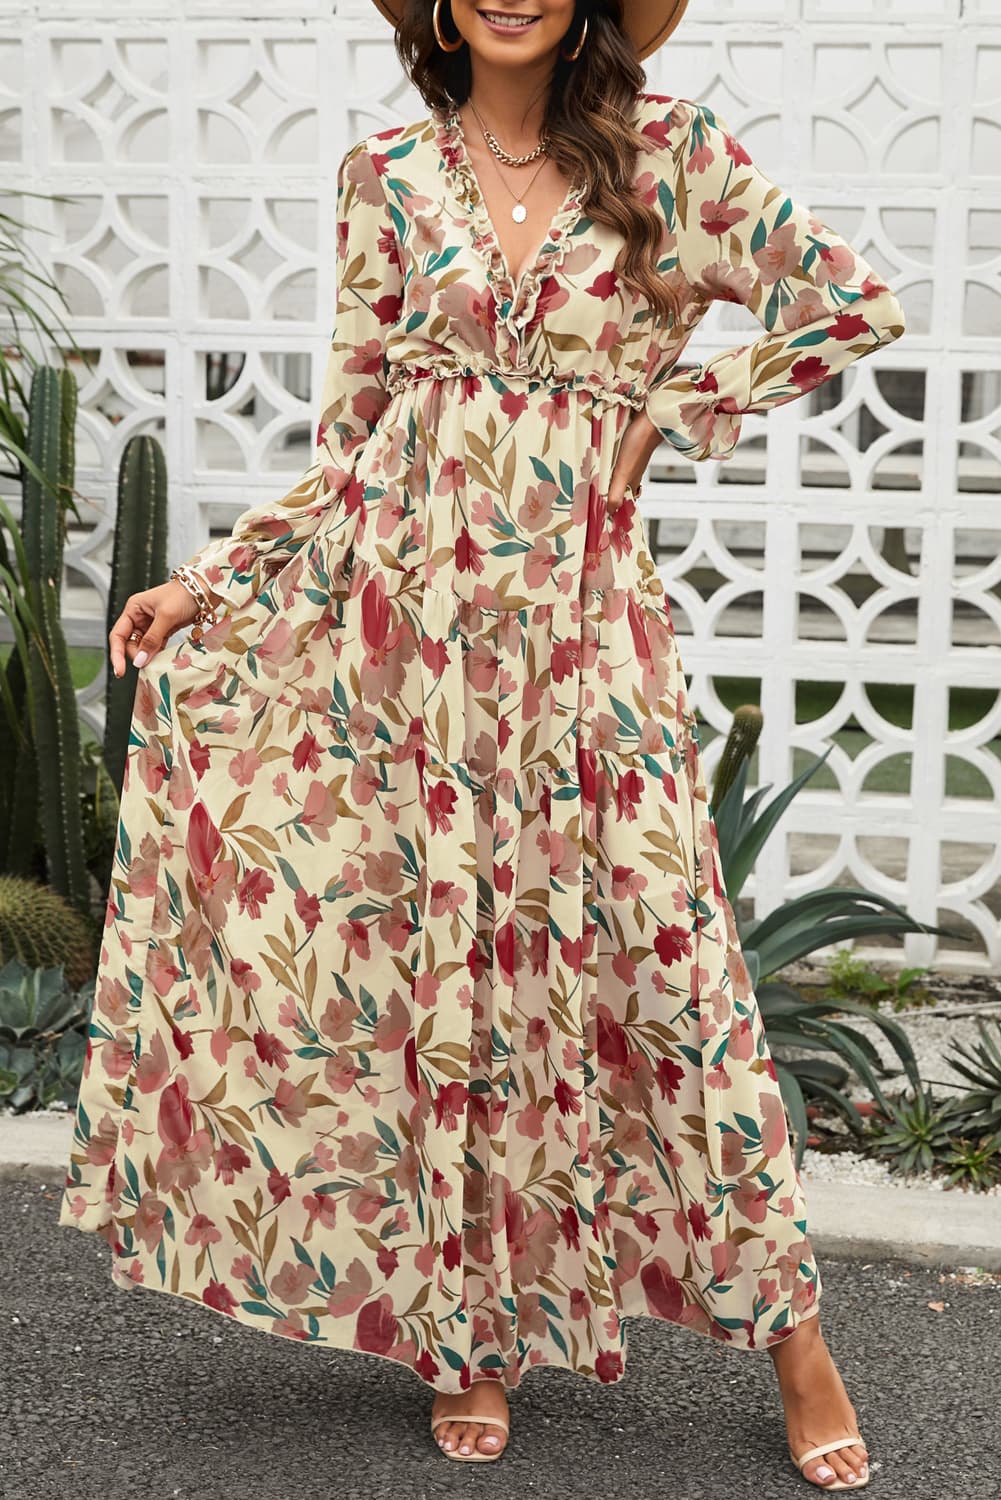 Queen's Whimsy Dreamy Floral Maxi Dress - Unleash Your Inner Romantic with a Modern-day Goddess Look - Feel Enchanted in Any Occasion - Guy Christopher